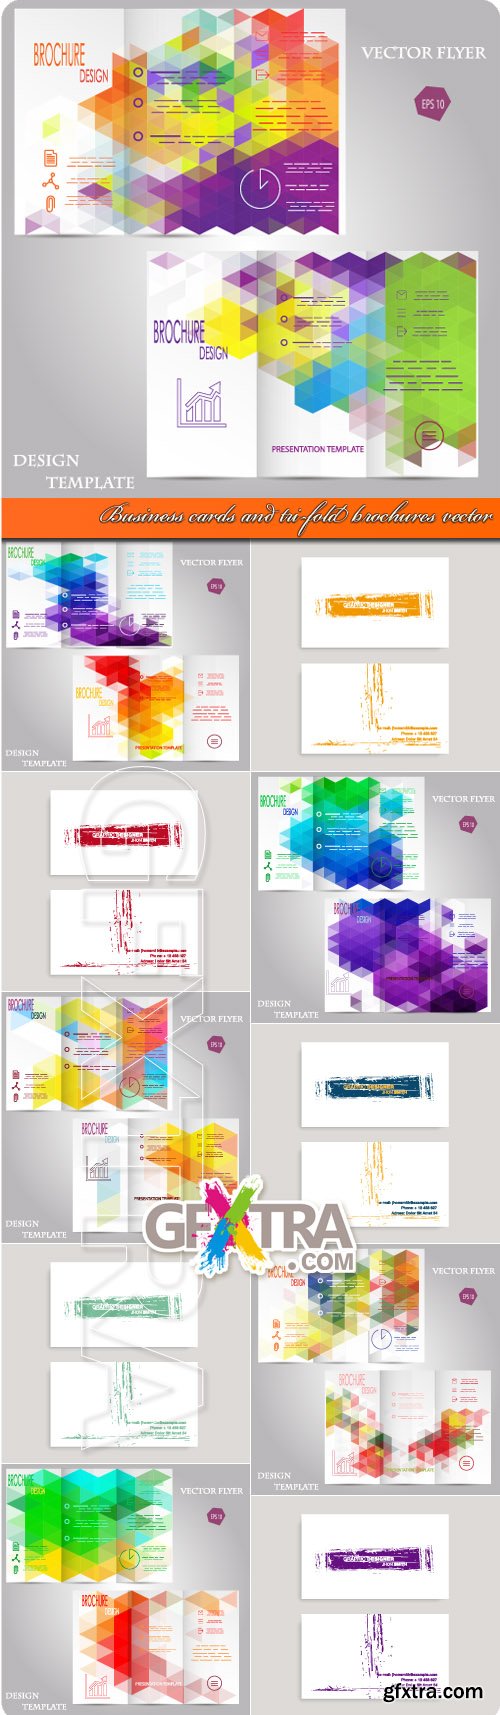 Business cards and tri-fold brochures vector